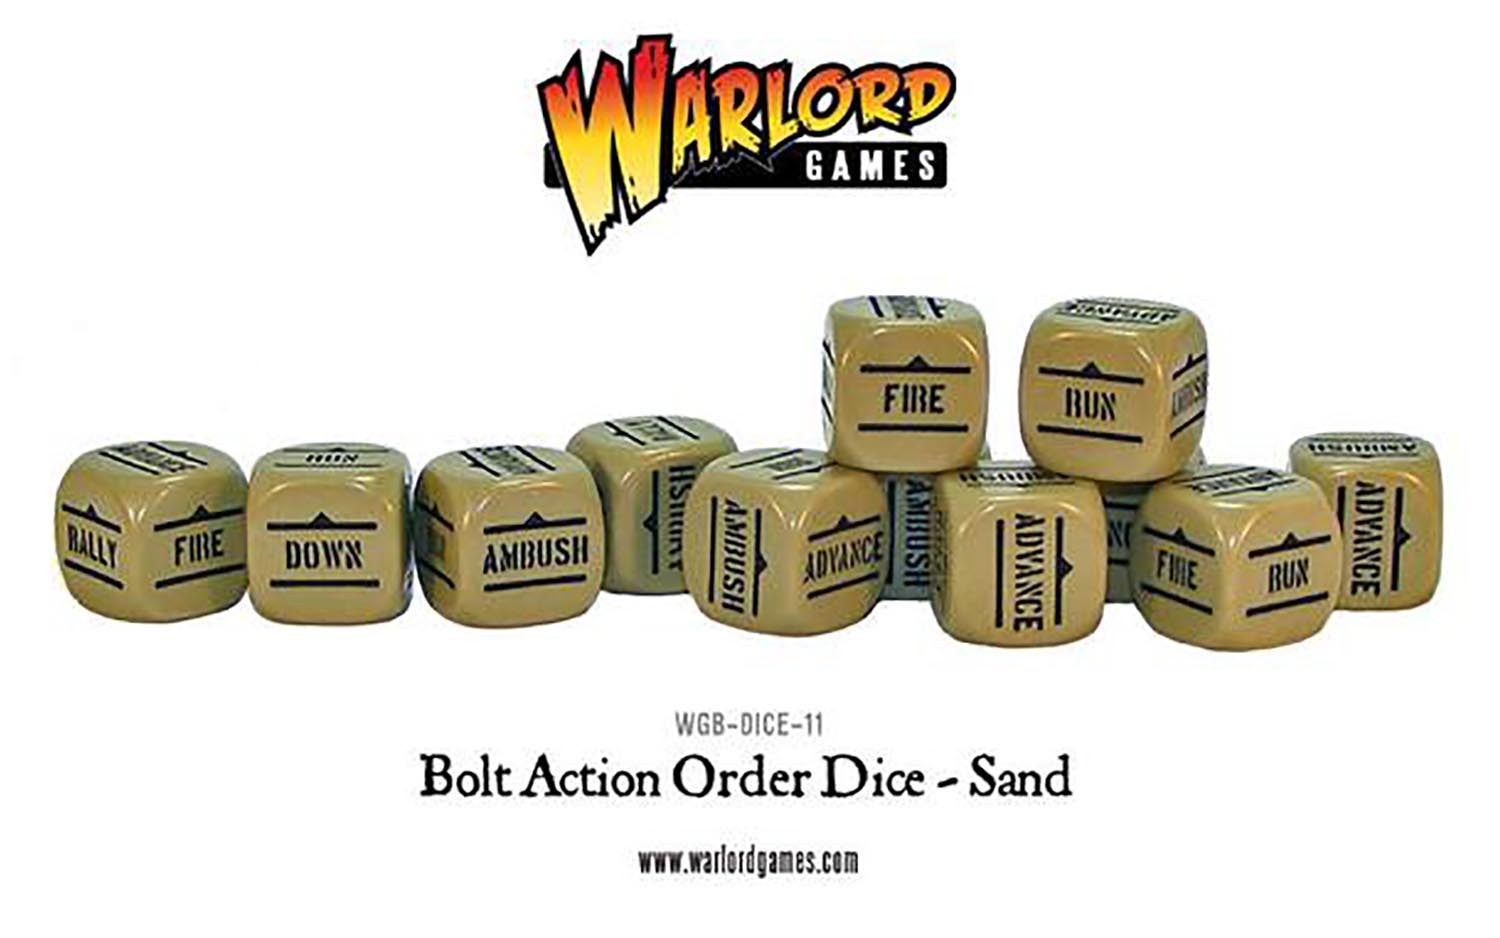 Bolt Action WWII Military Wargaming Sand Dice Pack of 12 Warlord Games WGB-DICE-11 